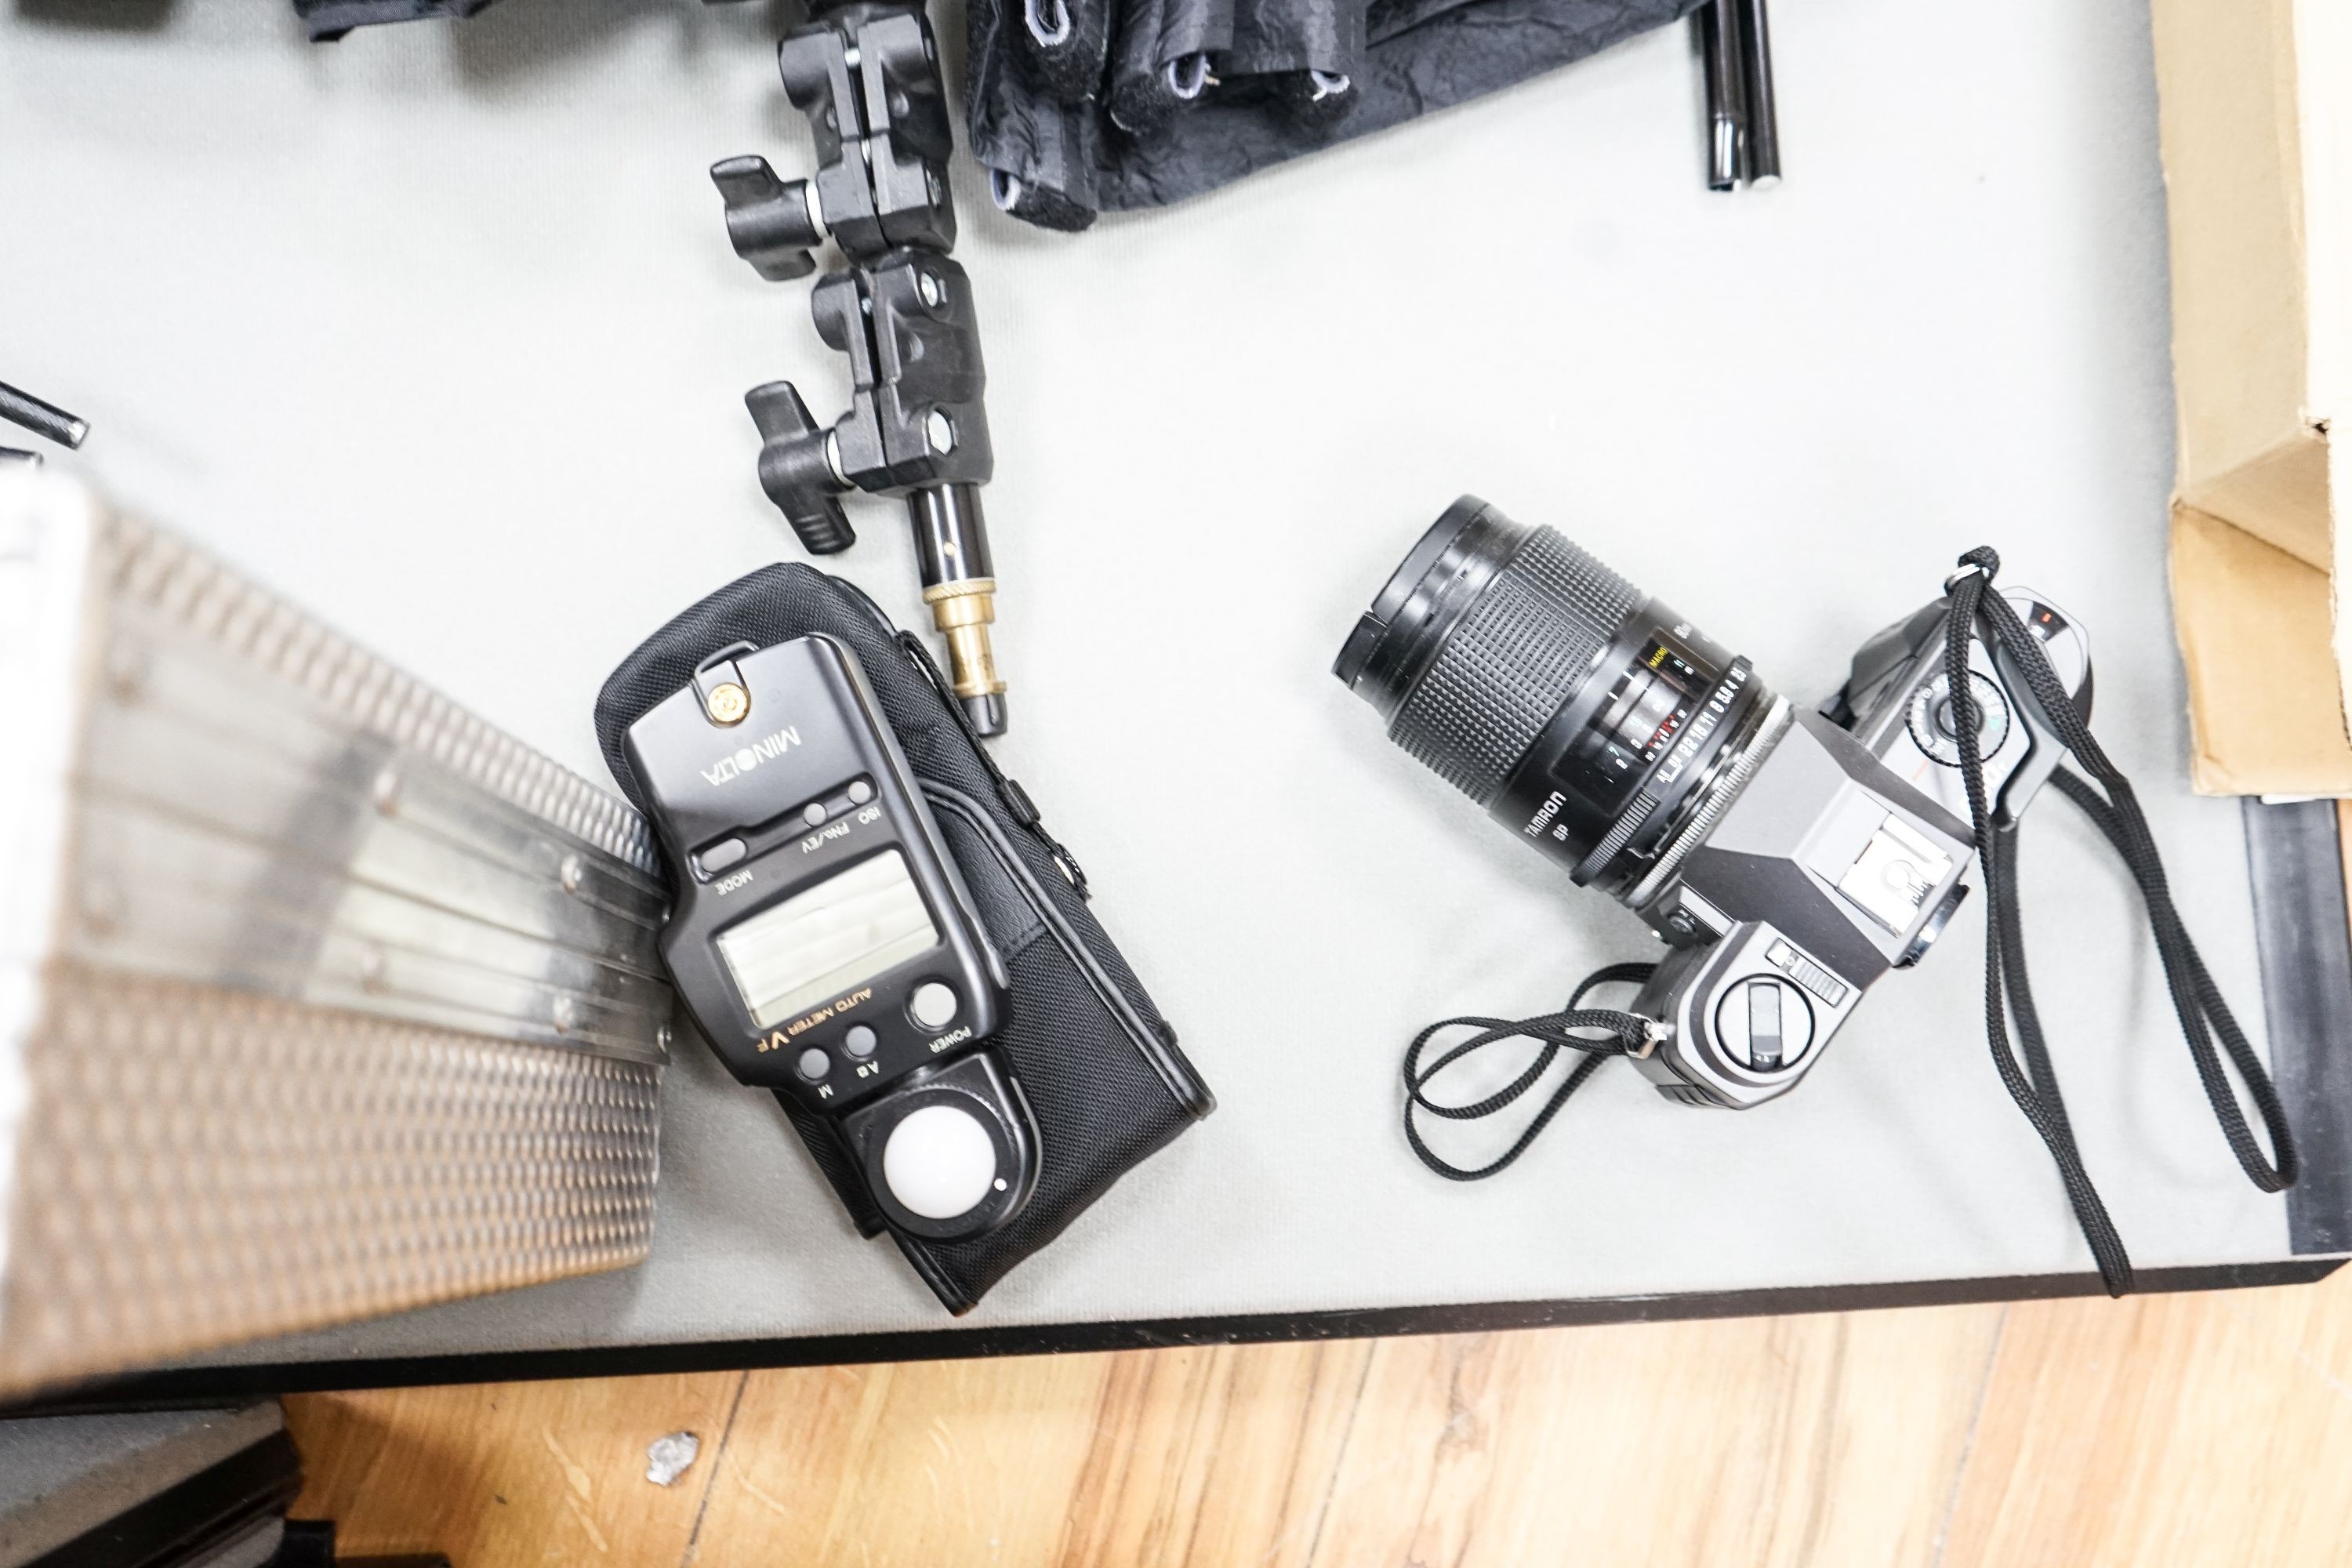 Professional photography equipment including a Pentax P30T SLR camera with Tamron 90mm f/2.5 lens, a pair of Bowens Esprit 1000 lights and a pair of Esprit 500 lights, a pair of Esprit 2 500 lights, various soft boxes, v